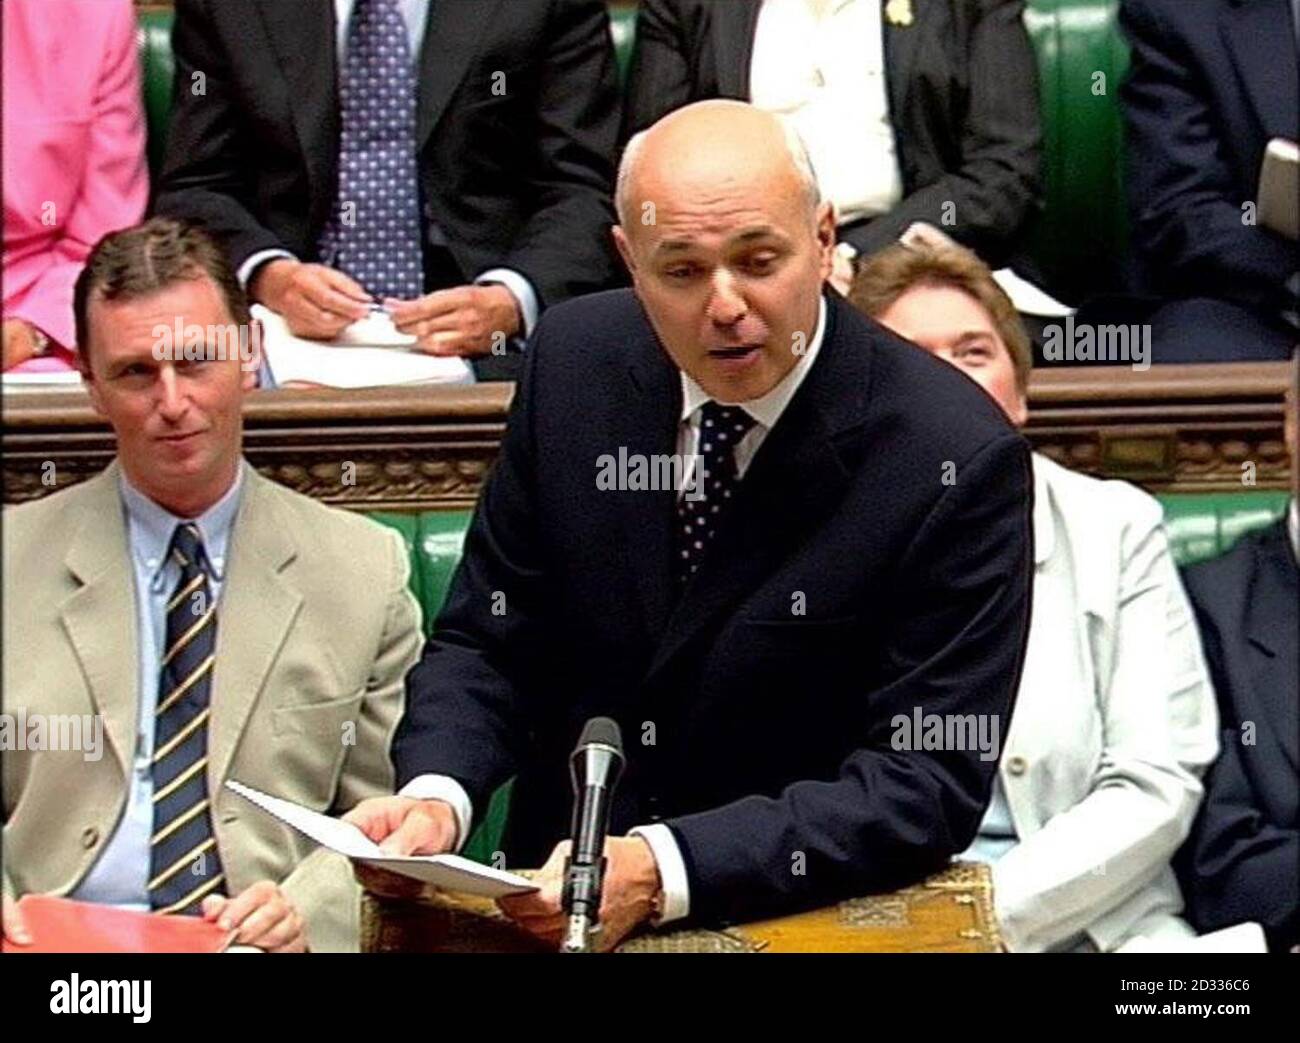 Leader of the Opposition Iain Duncan Smith during Prime Minister's Question Time in the House of Commons, central London. Stock Photo